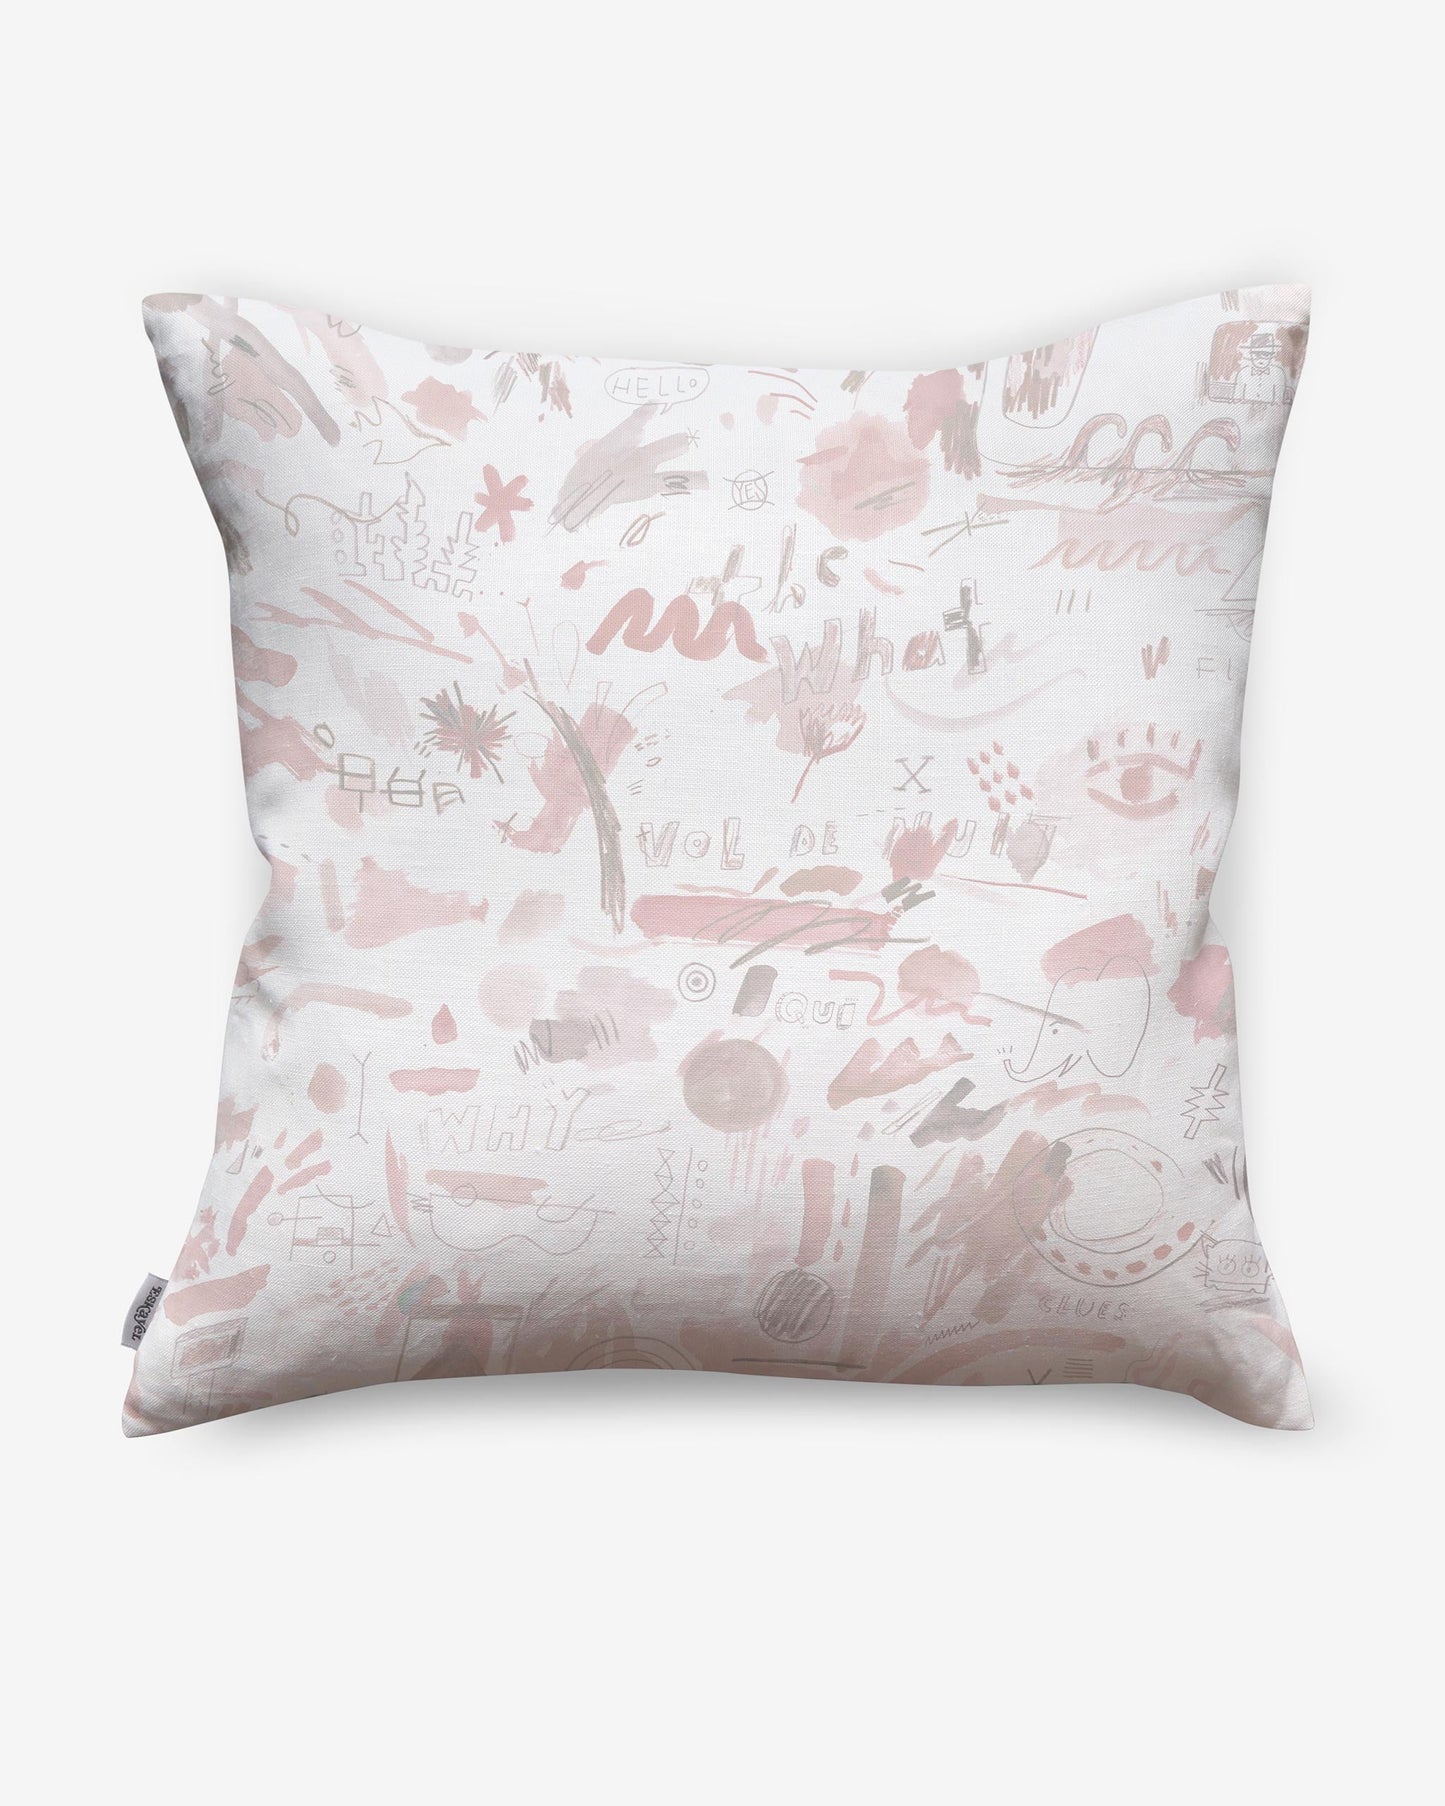 A Vol de Nuit Pillow Light Peach luxury fabric pillow with a pink and white design by Eskayel